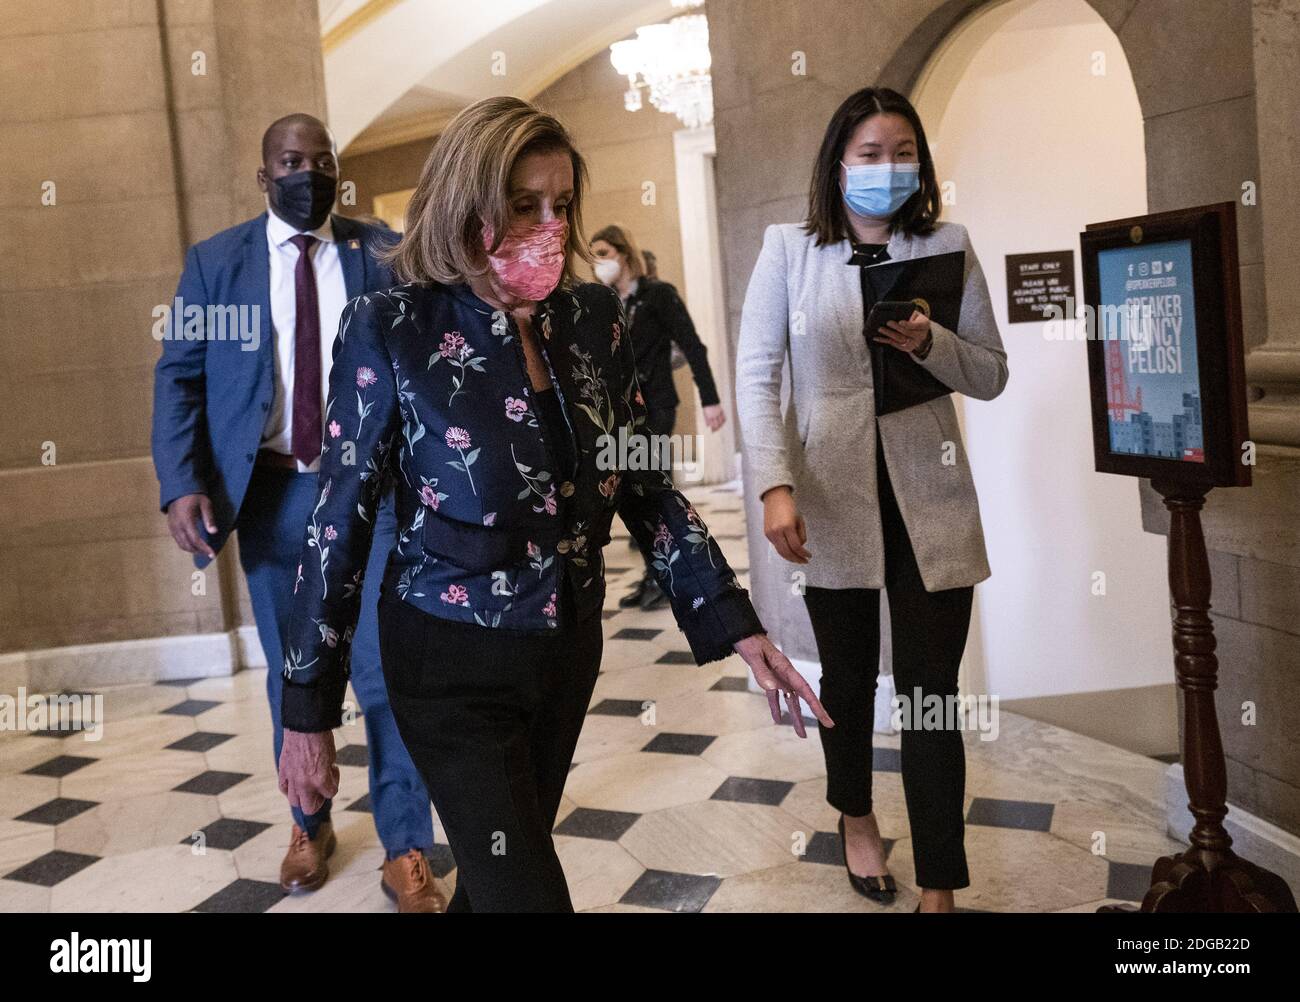 Washington, United States. 08th Dec, 2020. Speaker of the House Nancy Pelosi, D-Calif., leaves the House Chambers as lawmakers continue debate on the next COVID-19 stimulus package, at the U.S. Capitol in Washington, DC on Tuesday, December 8, 2020. Photo by Kevin Dietsch/UPI Credit: UPI/Alamy Live News Stock Photo